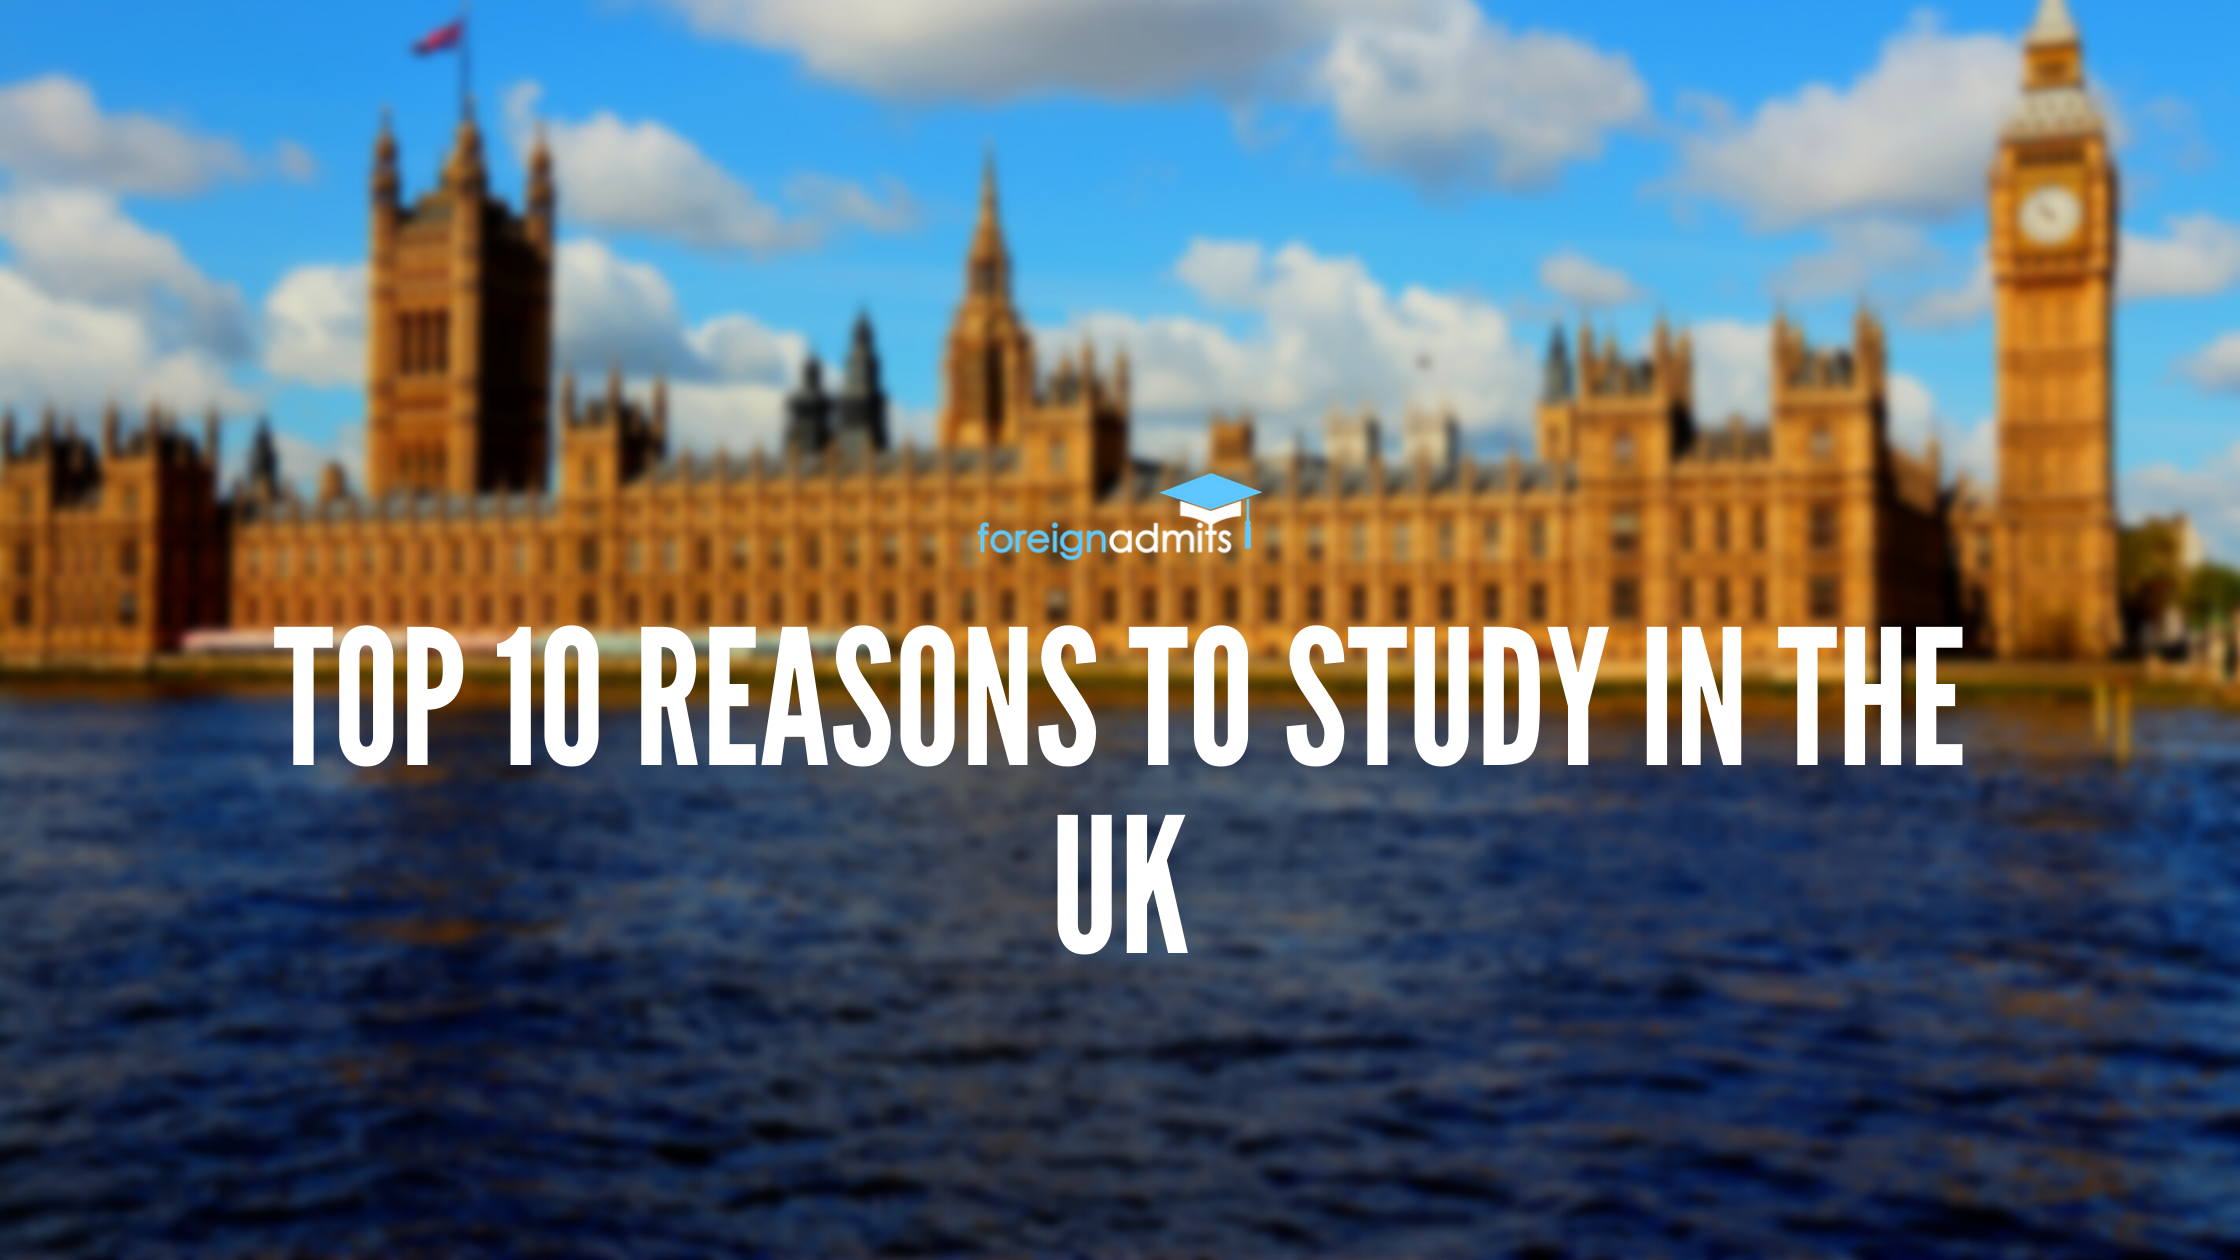 Top 10 reasons to study in the UK